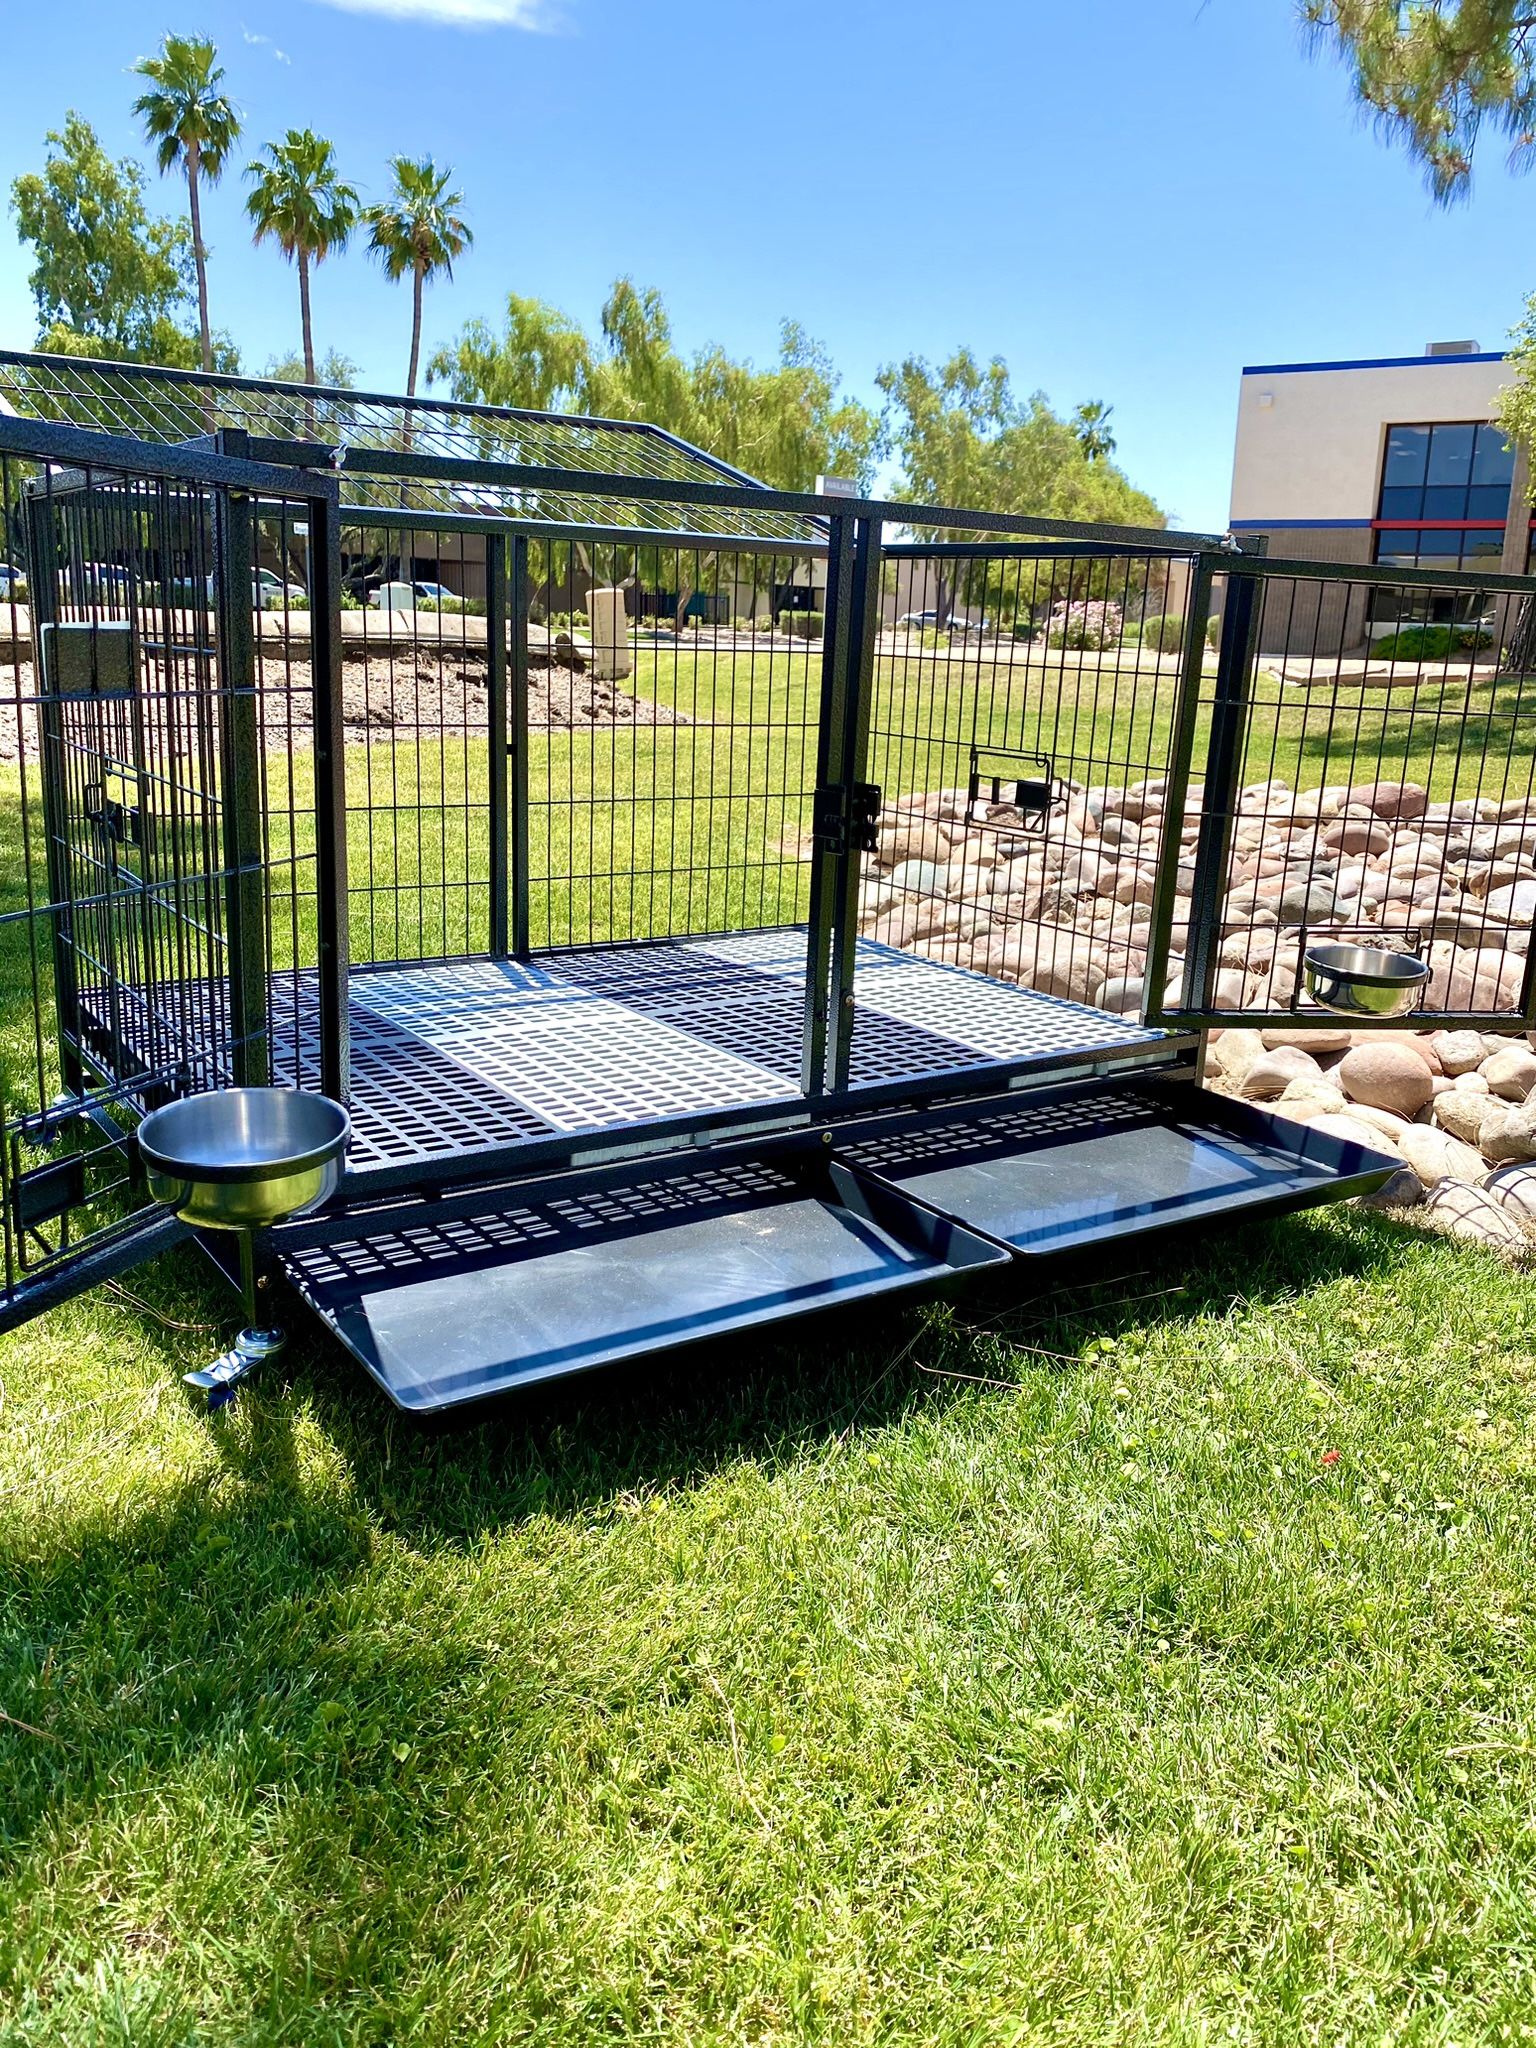 Brandnew HD Divider Kennel Crate Cage W/ Tray & Casters & Bowls  🐶🐶 Dimensions:43”L X 28”W X 26”H ✅ Comfy Plastic Floor 